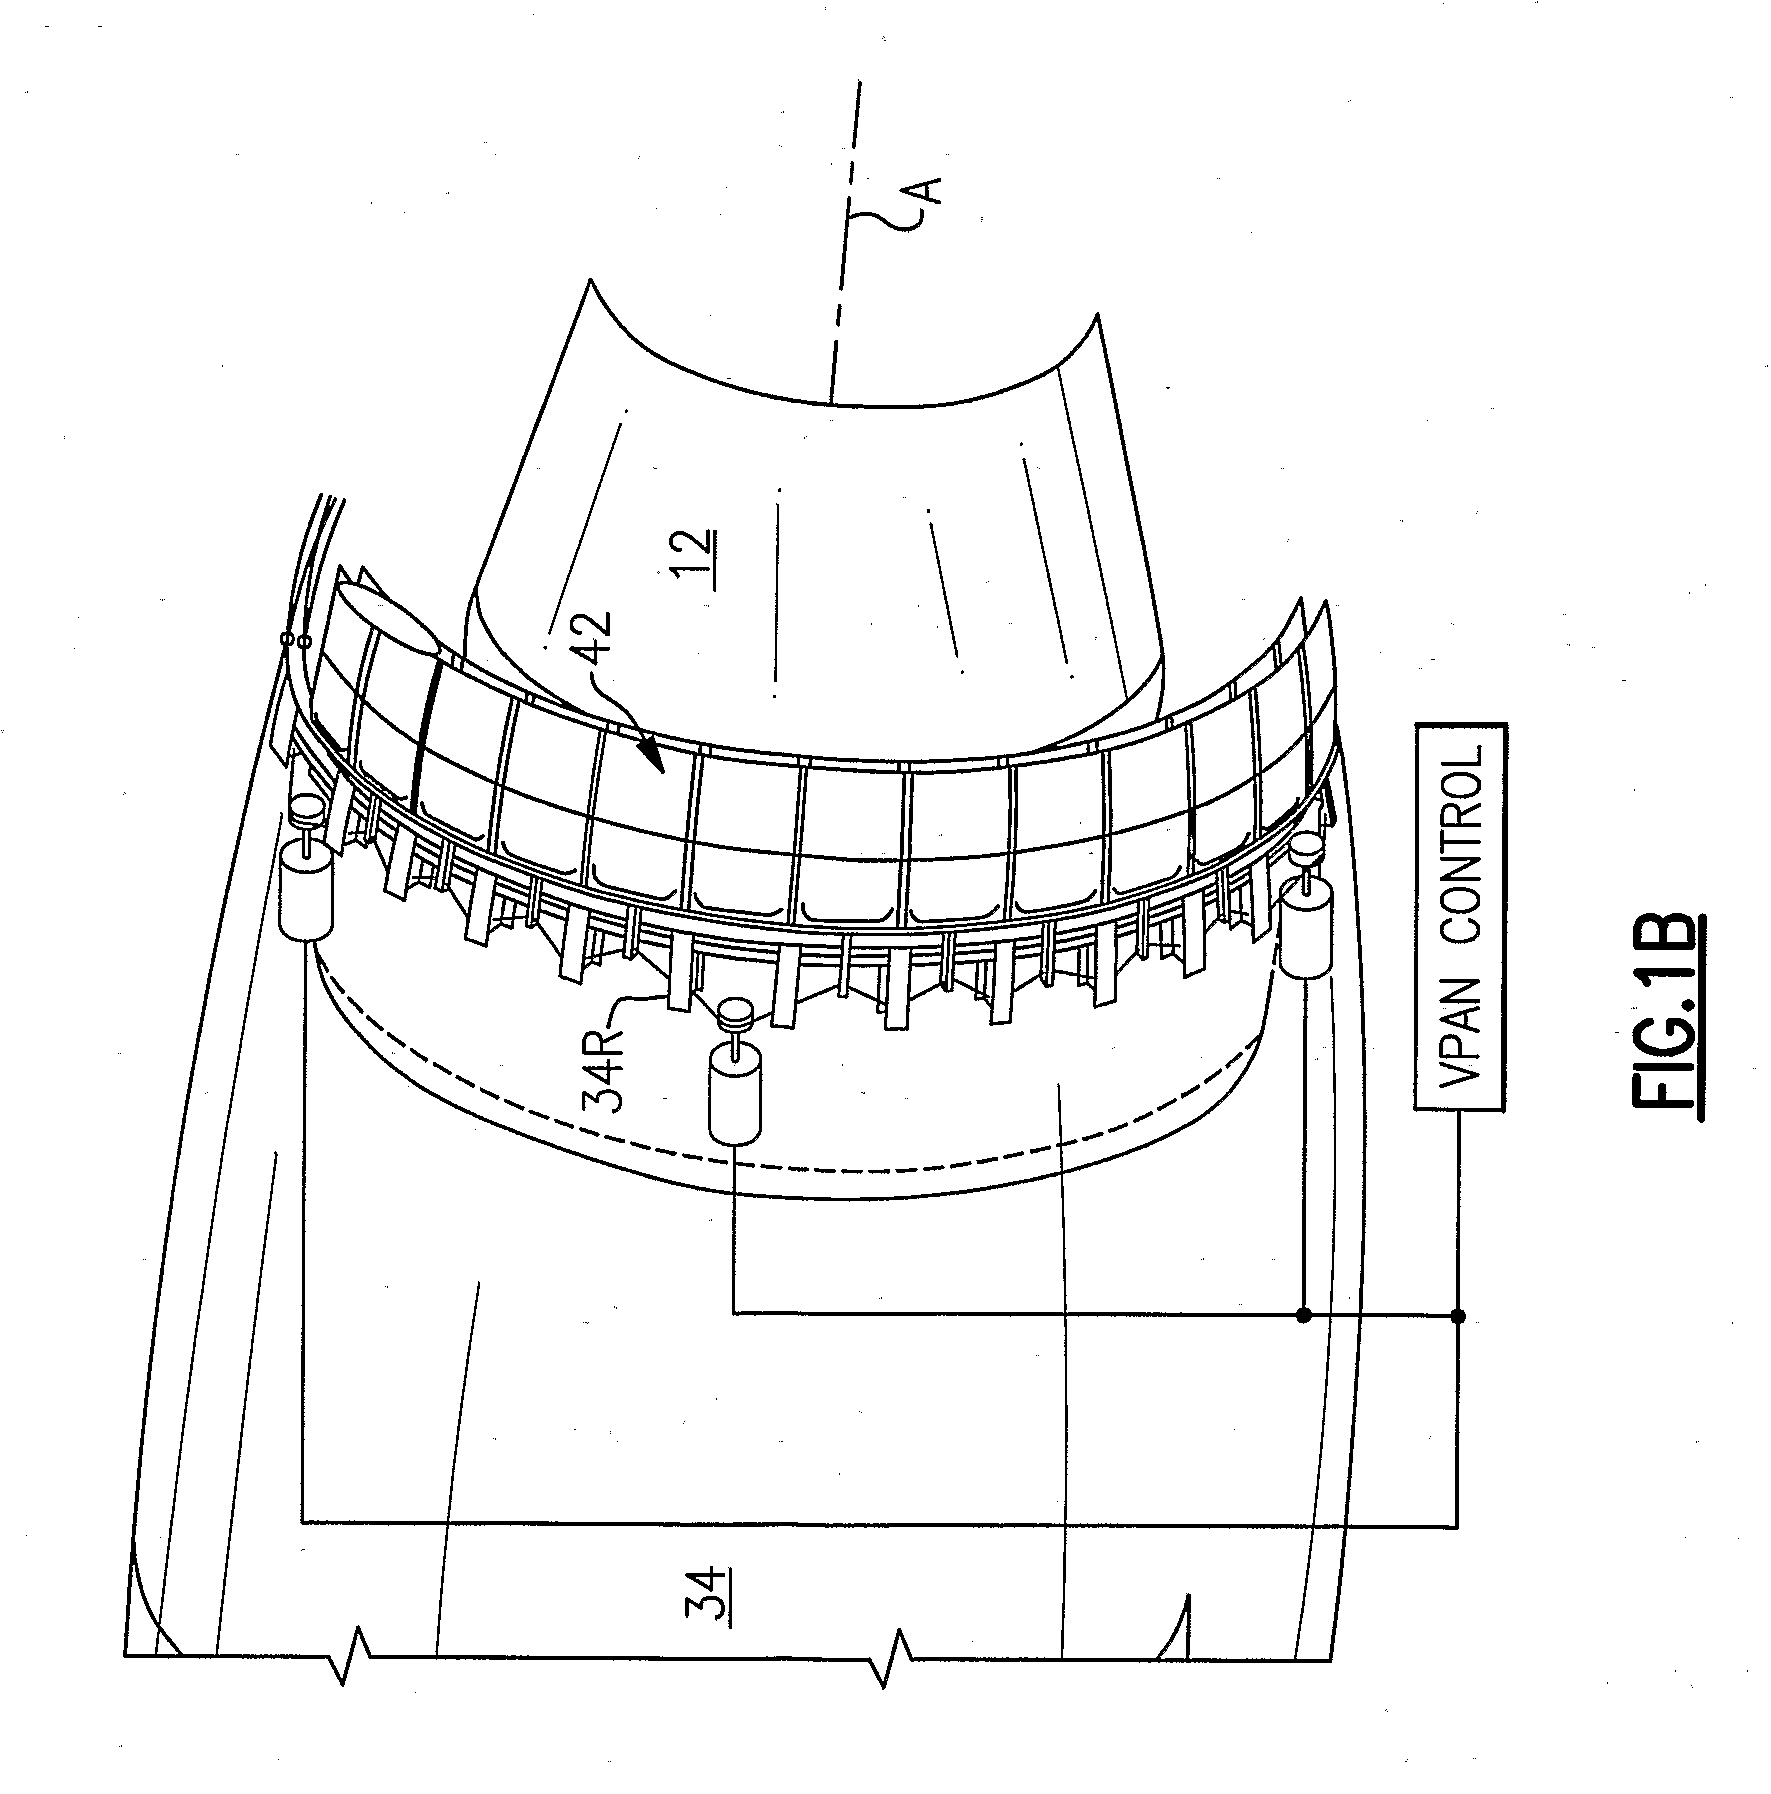 Fan variable area nozzle with cable actuator system